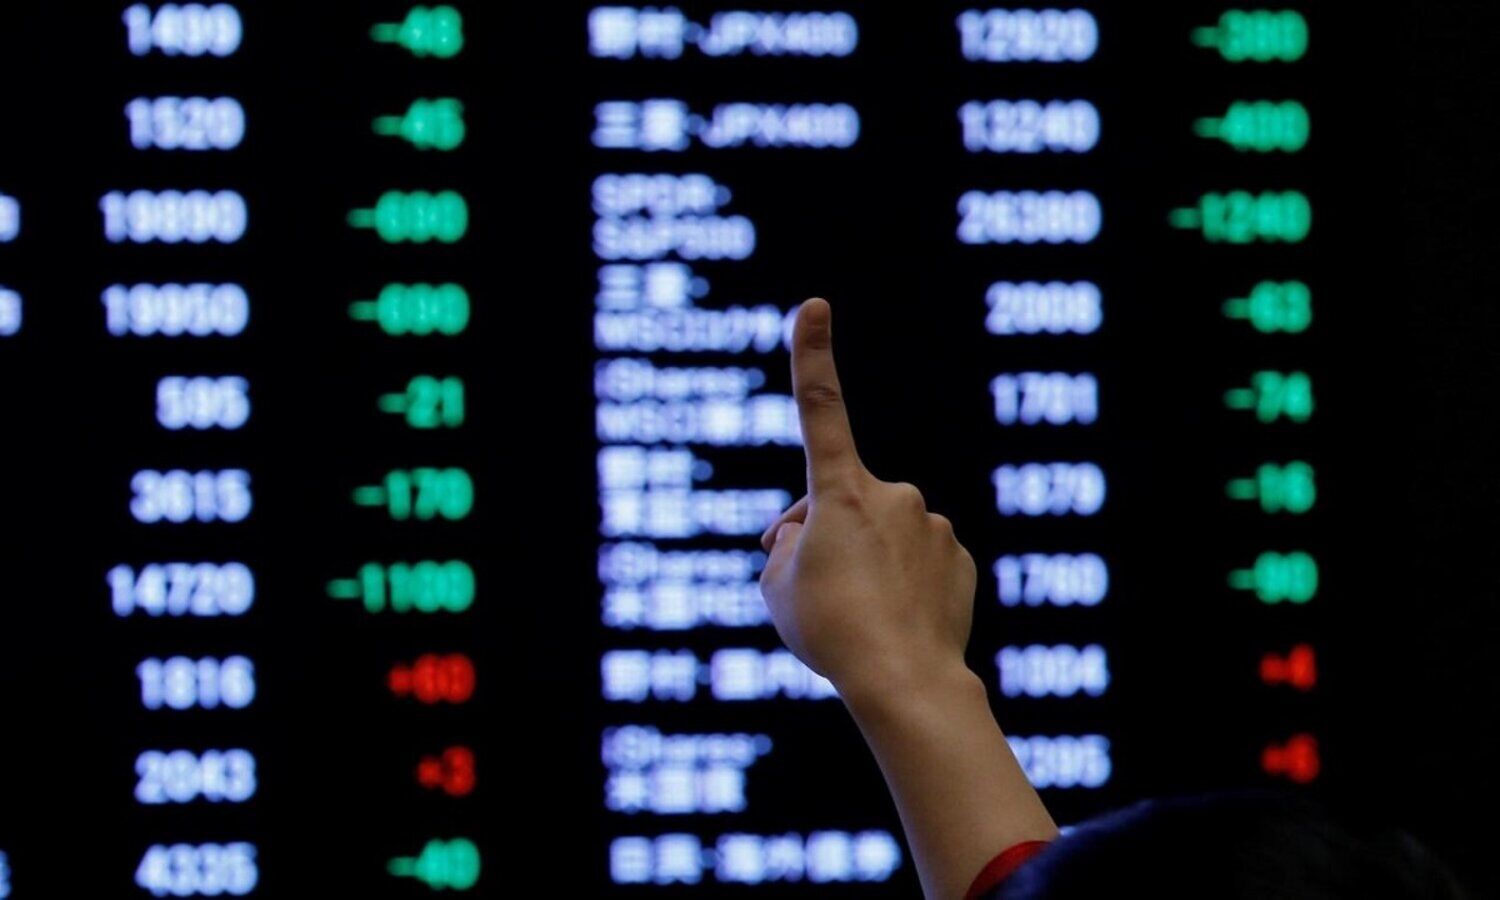 Share Market Today: Buying trend in the stock market, Sensex up 250 points